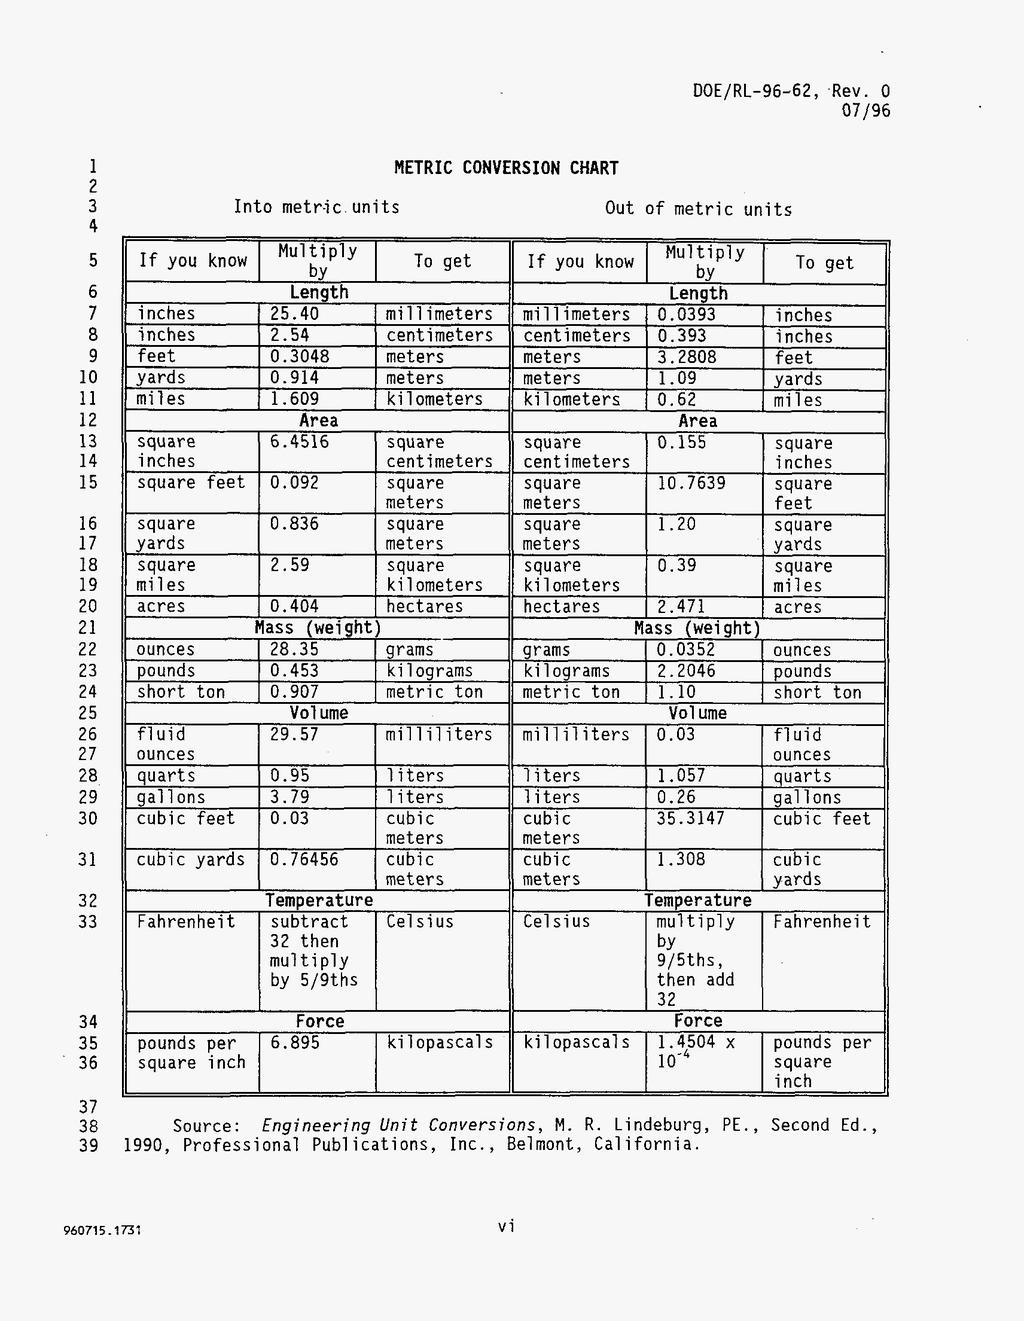 1 3 4 5 6 7 8 1 1 0 1 3 4 5 6 7 8 30 3 33 34 35 36 37 38 3 Into metr-ic units METRIC CONVERSION CHART Out of metric units gal 1 ons 1 i ters 1 i ters cubic cubic meters meters cubic yards 0.